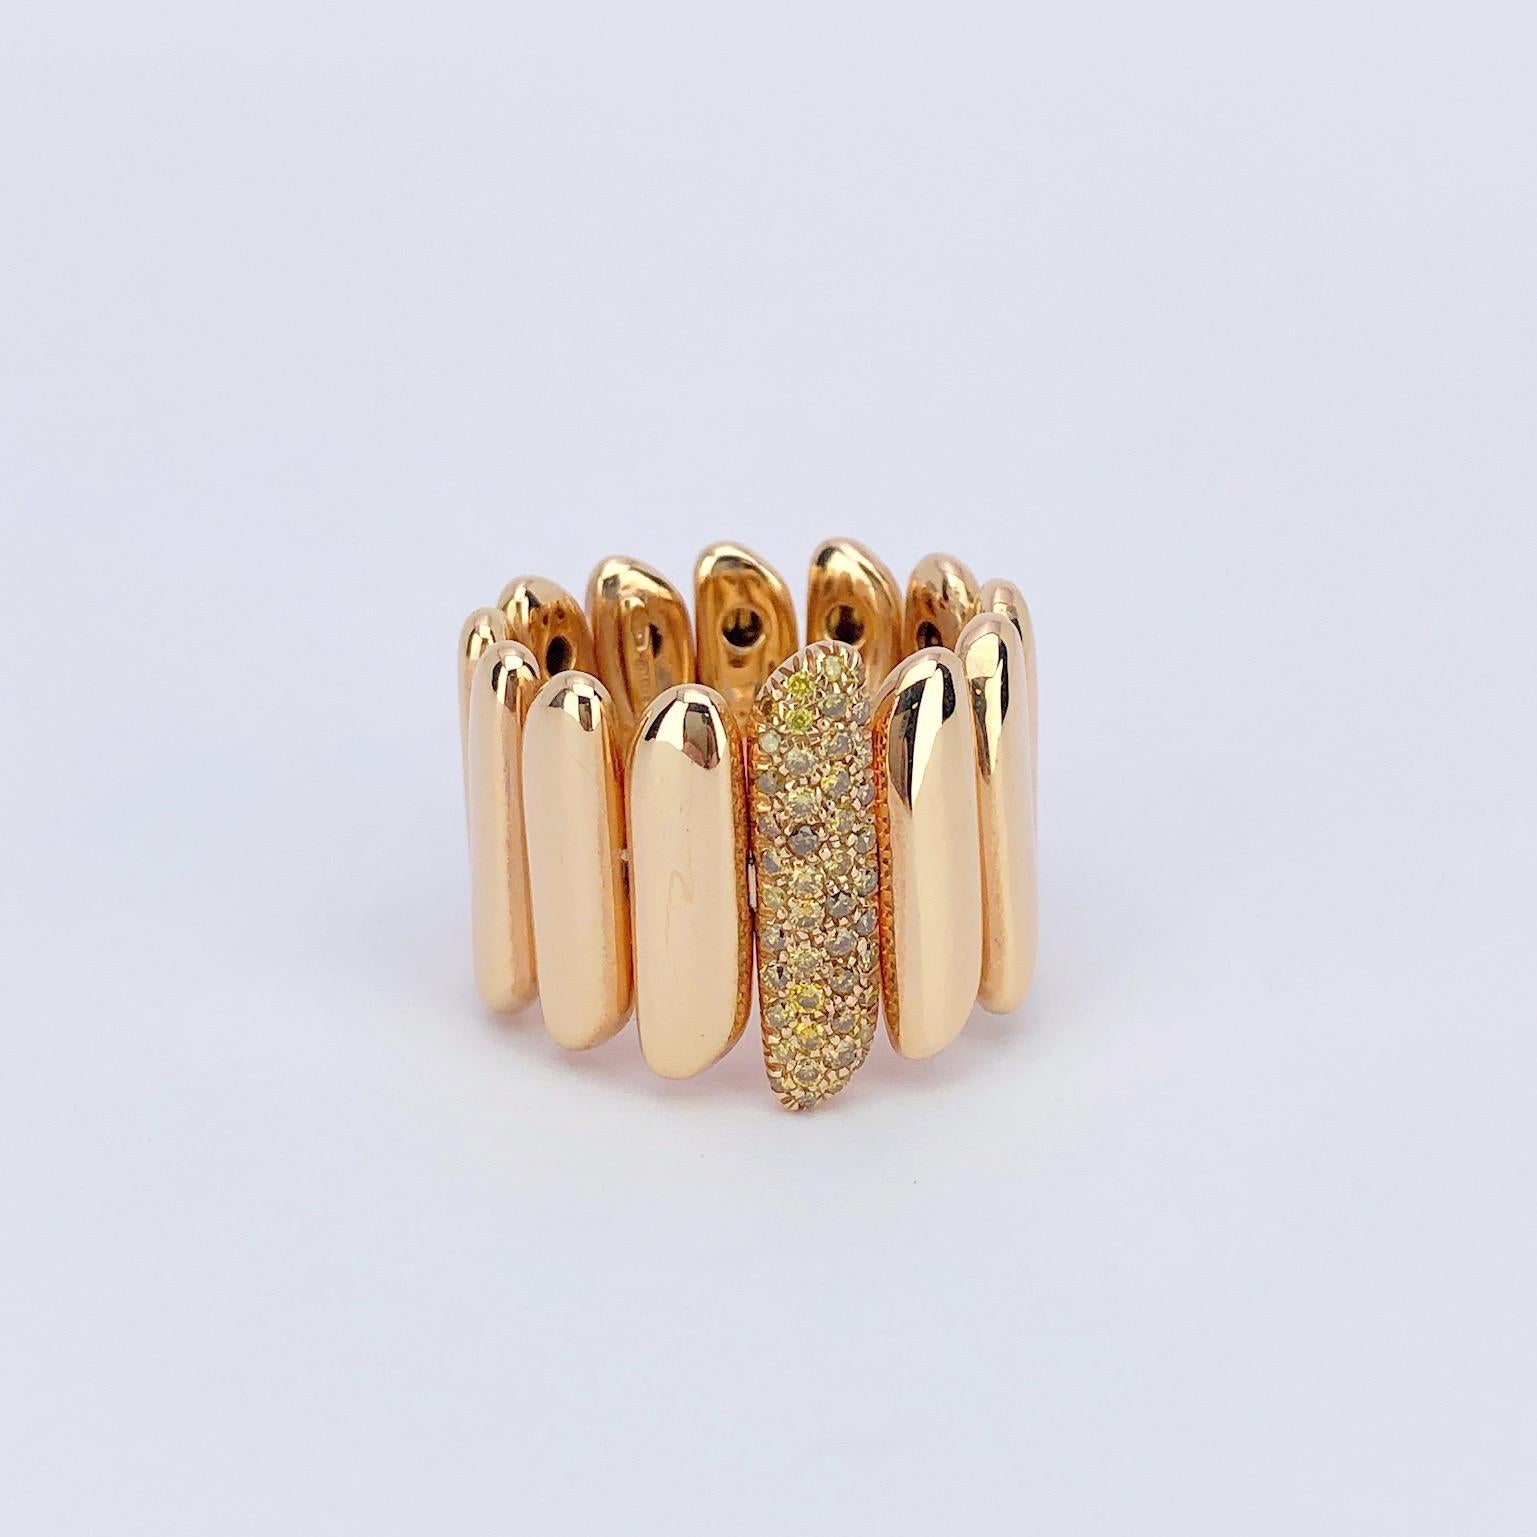 This 18 karat rose gold ring is designed with shiny rose gold motifs that are approximately 18mm wide. The center motif is set with pave yellow diamonds. The band type ring is opened in the back allowing for expansion. Fits size 6-9. Matching